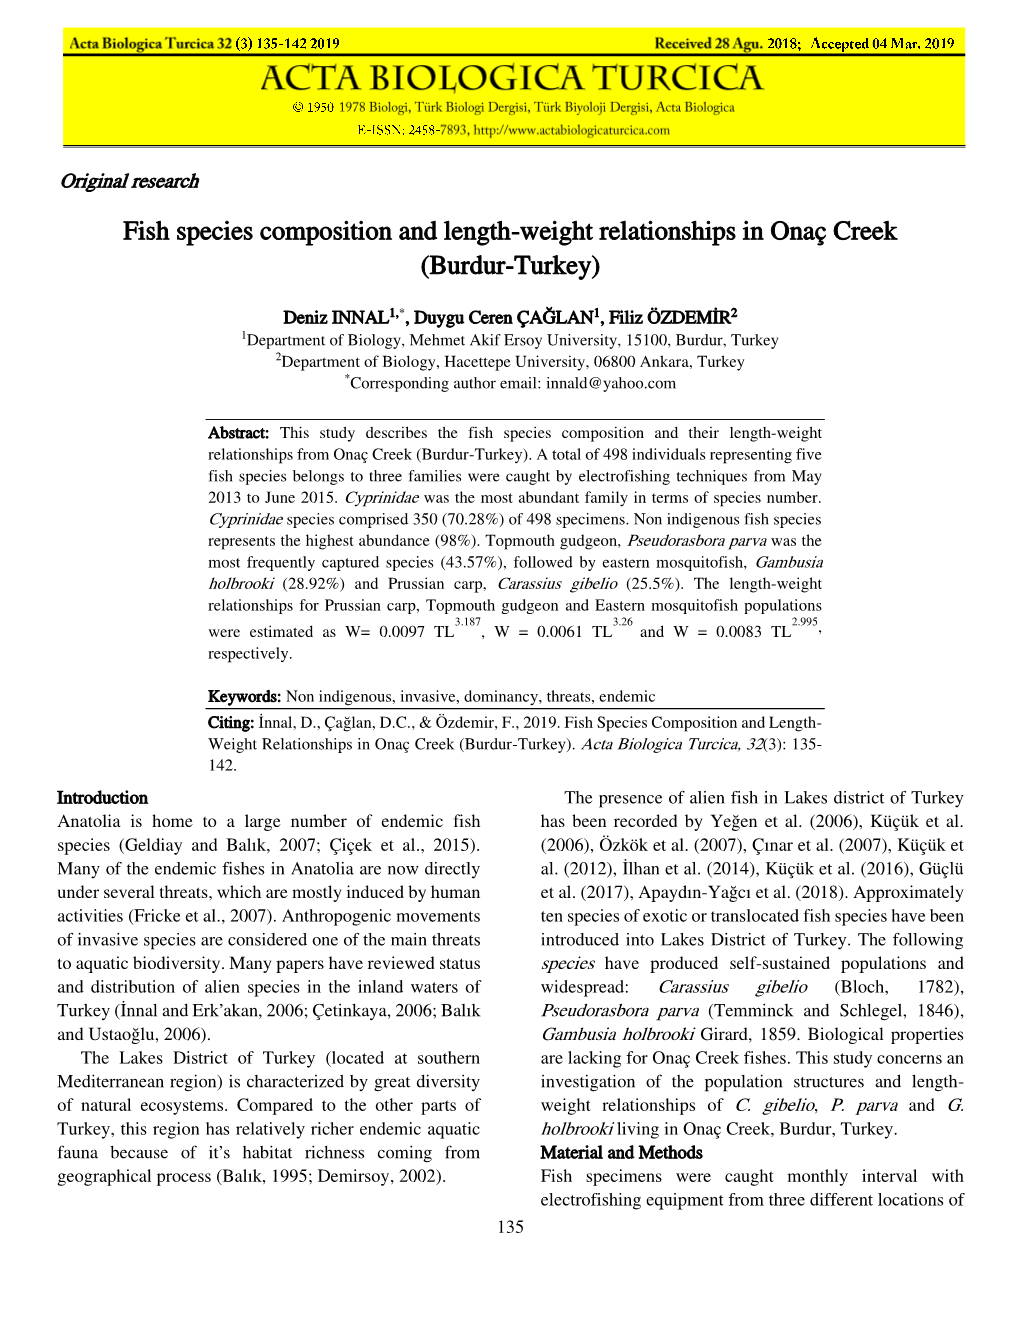 Fish Species Composition and Length-Weight Relationships in Onaç Creek (Burdur-Turkey)